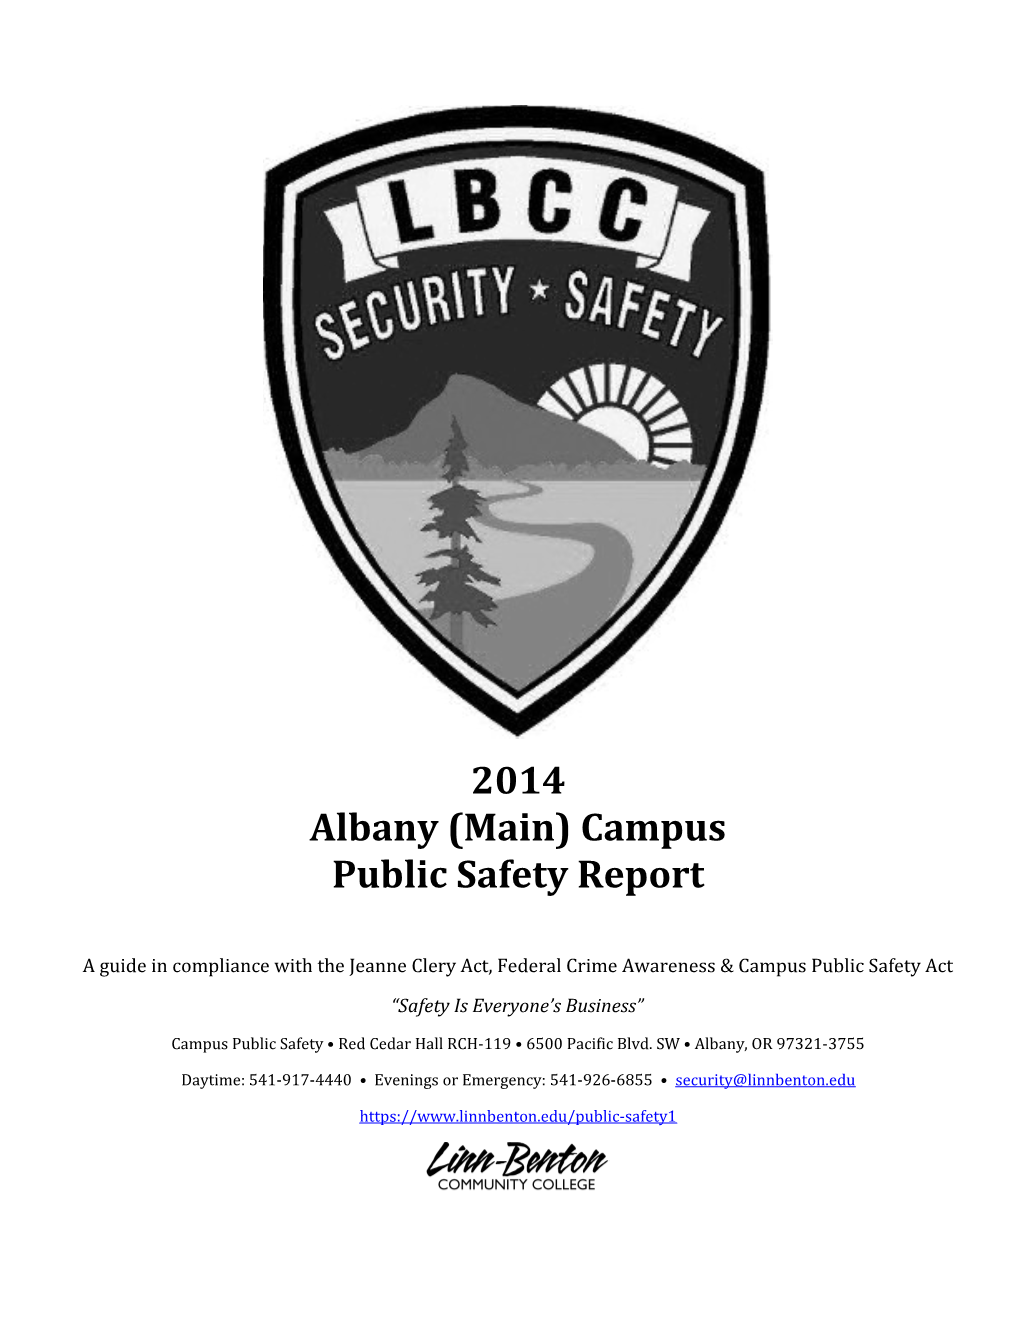 2014 Albany (Main) Campus Public Safety Report